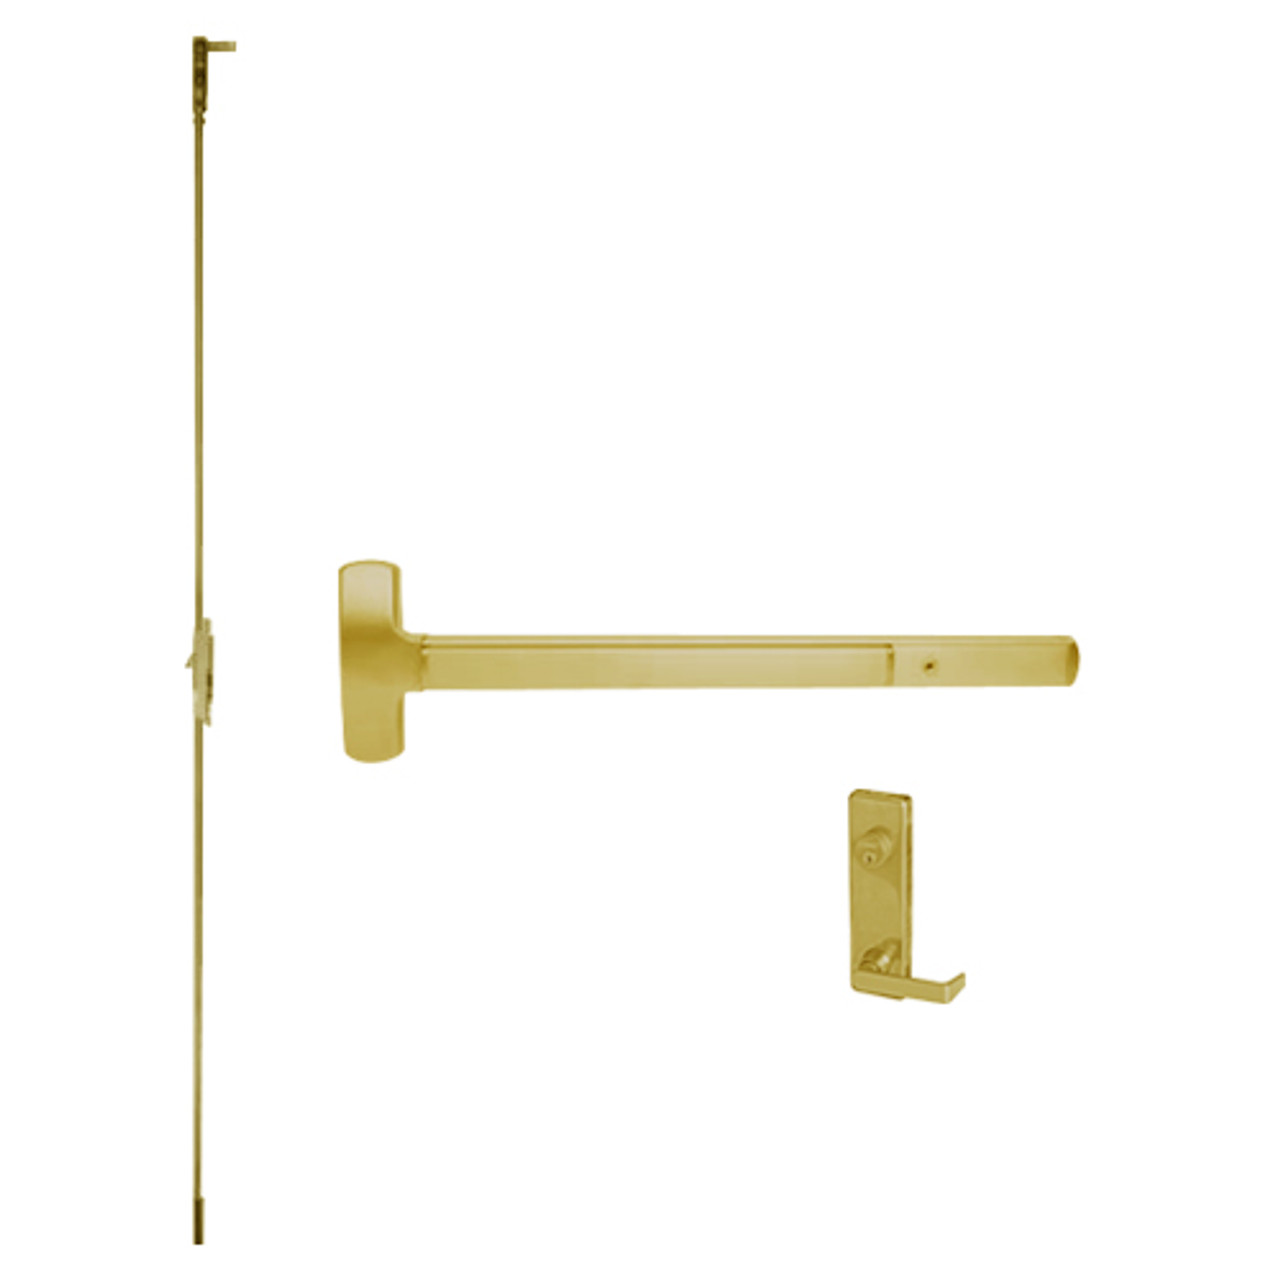 25-C-L-DANE-US3-2-LHR Falcon Exit Device in Polished Brass